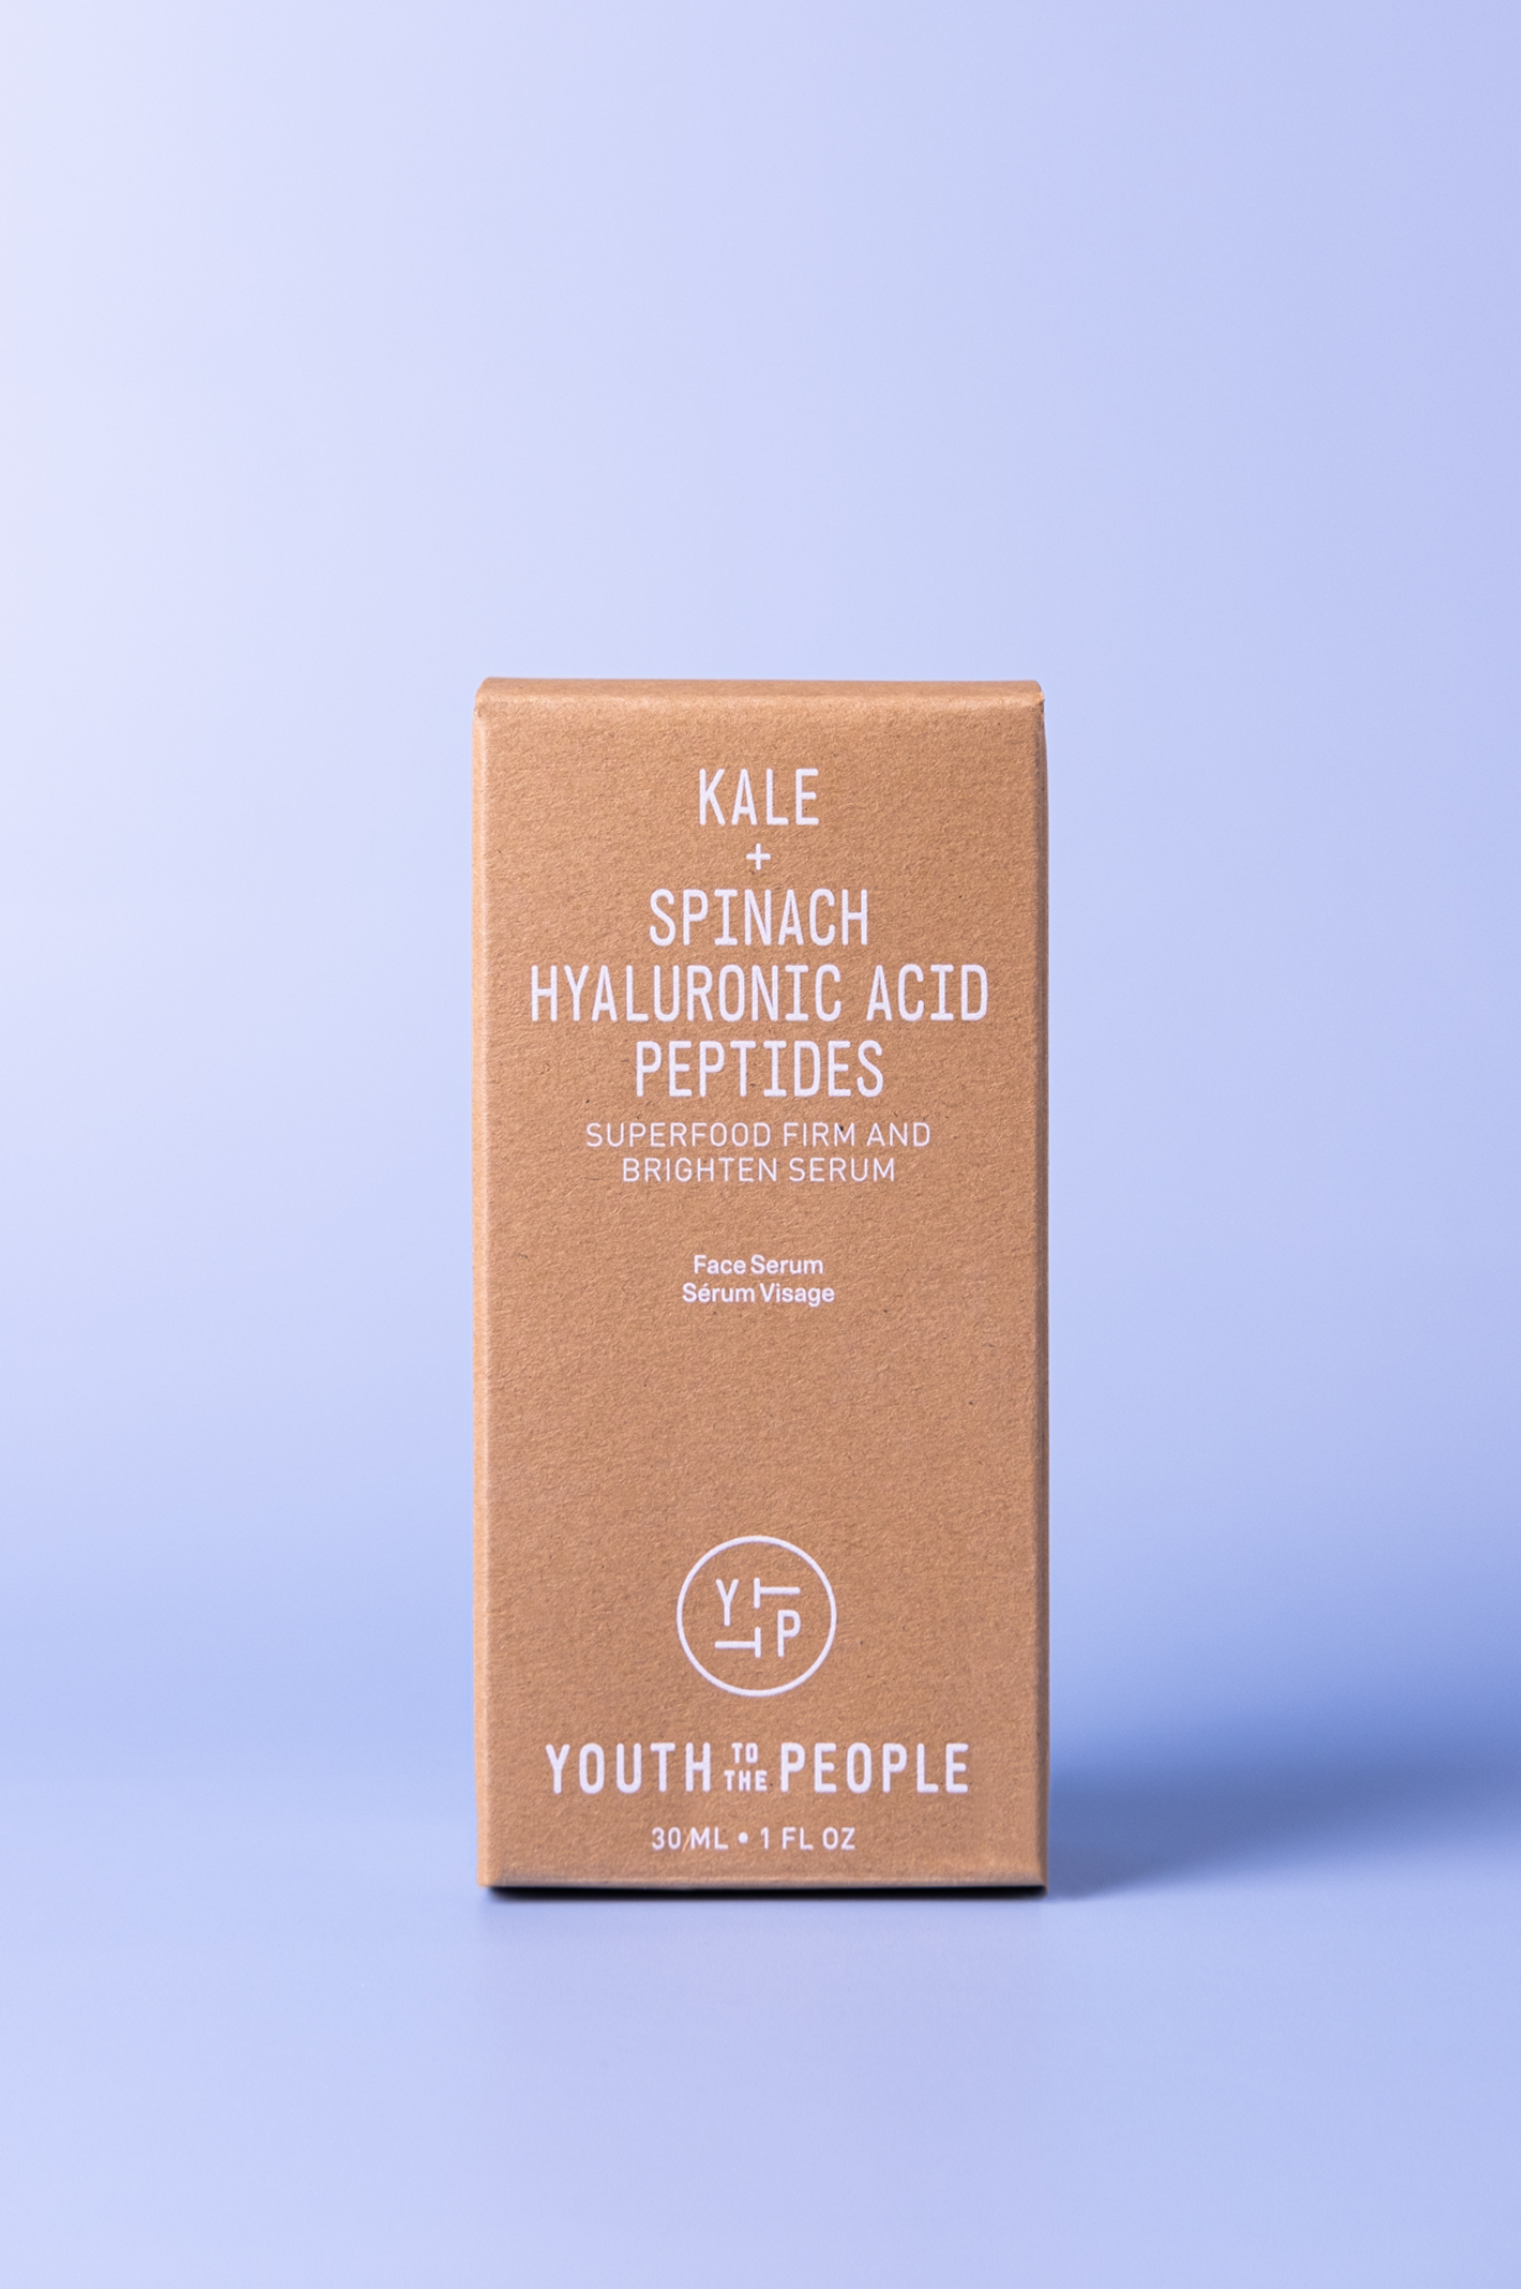 Youth to the People Superfood Firm + Brighten Serum